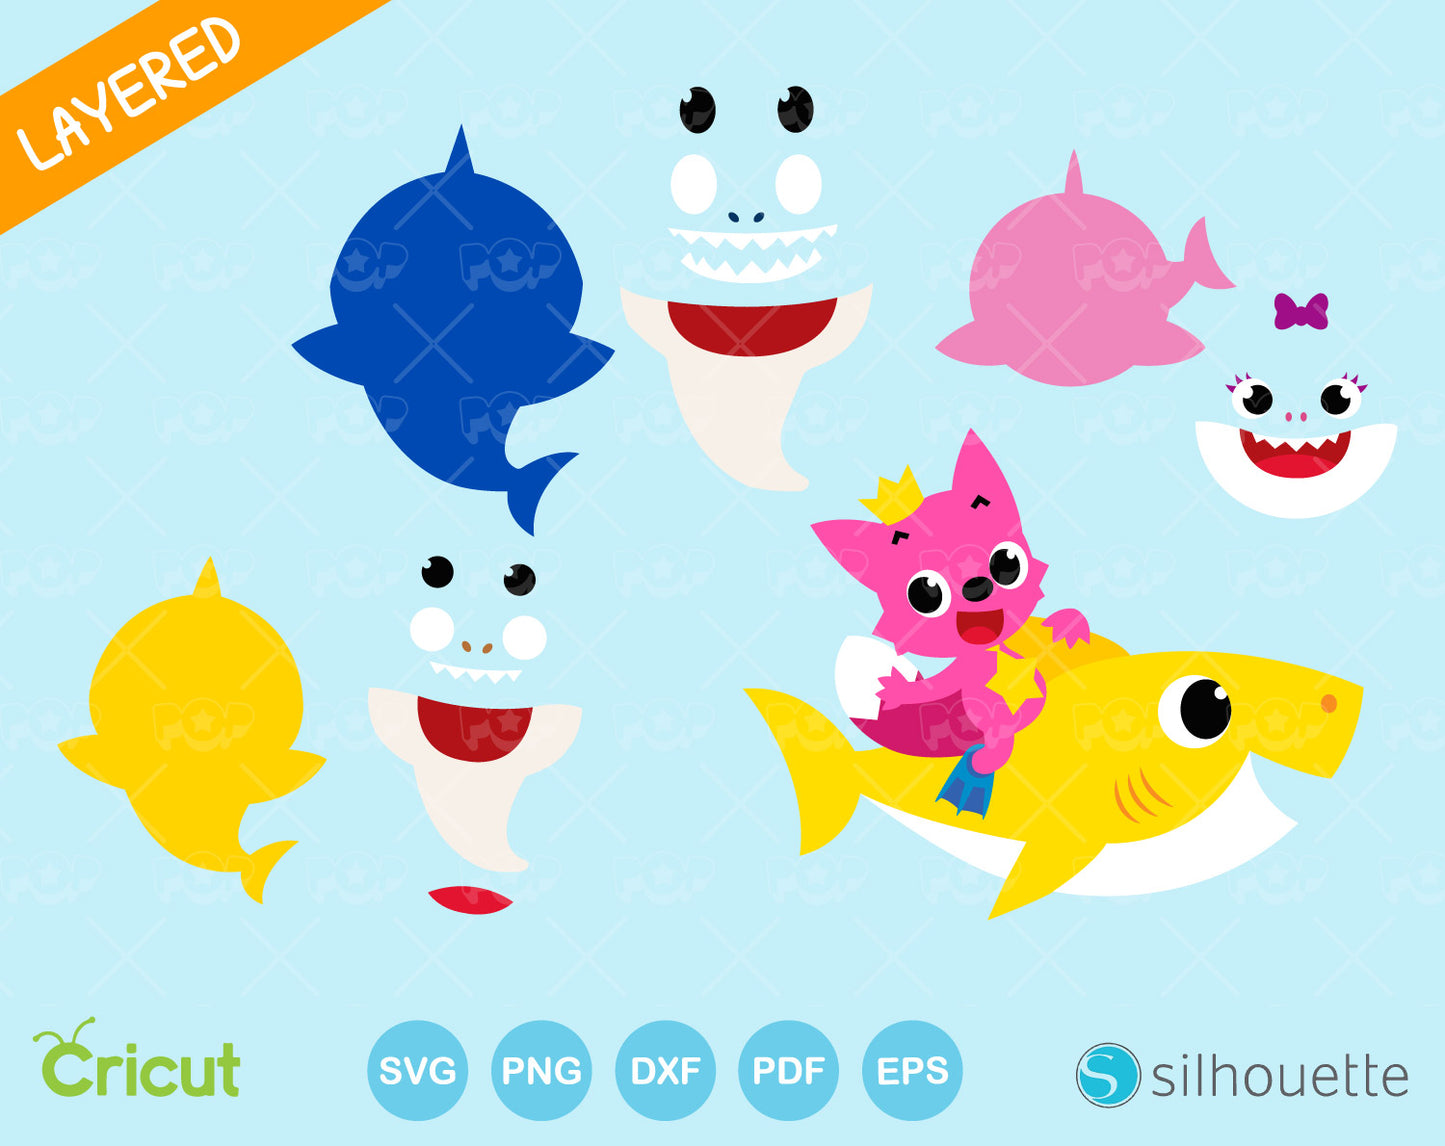 Baby Shark clipart bundle, Baby Shark svg cutting files for Cricut / Silhouette, Baby Shark png, instant download